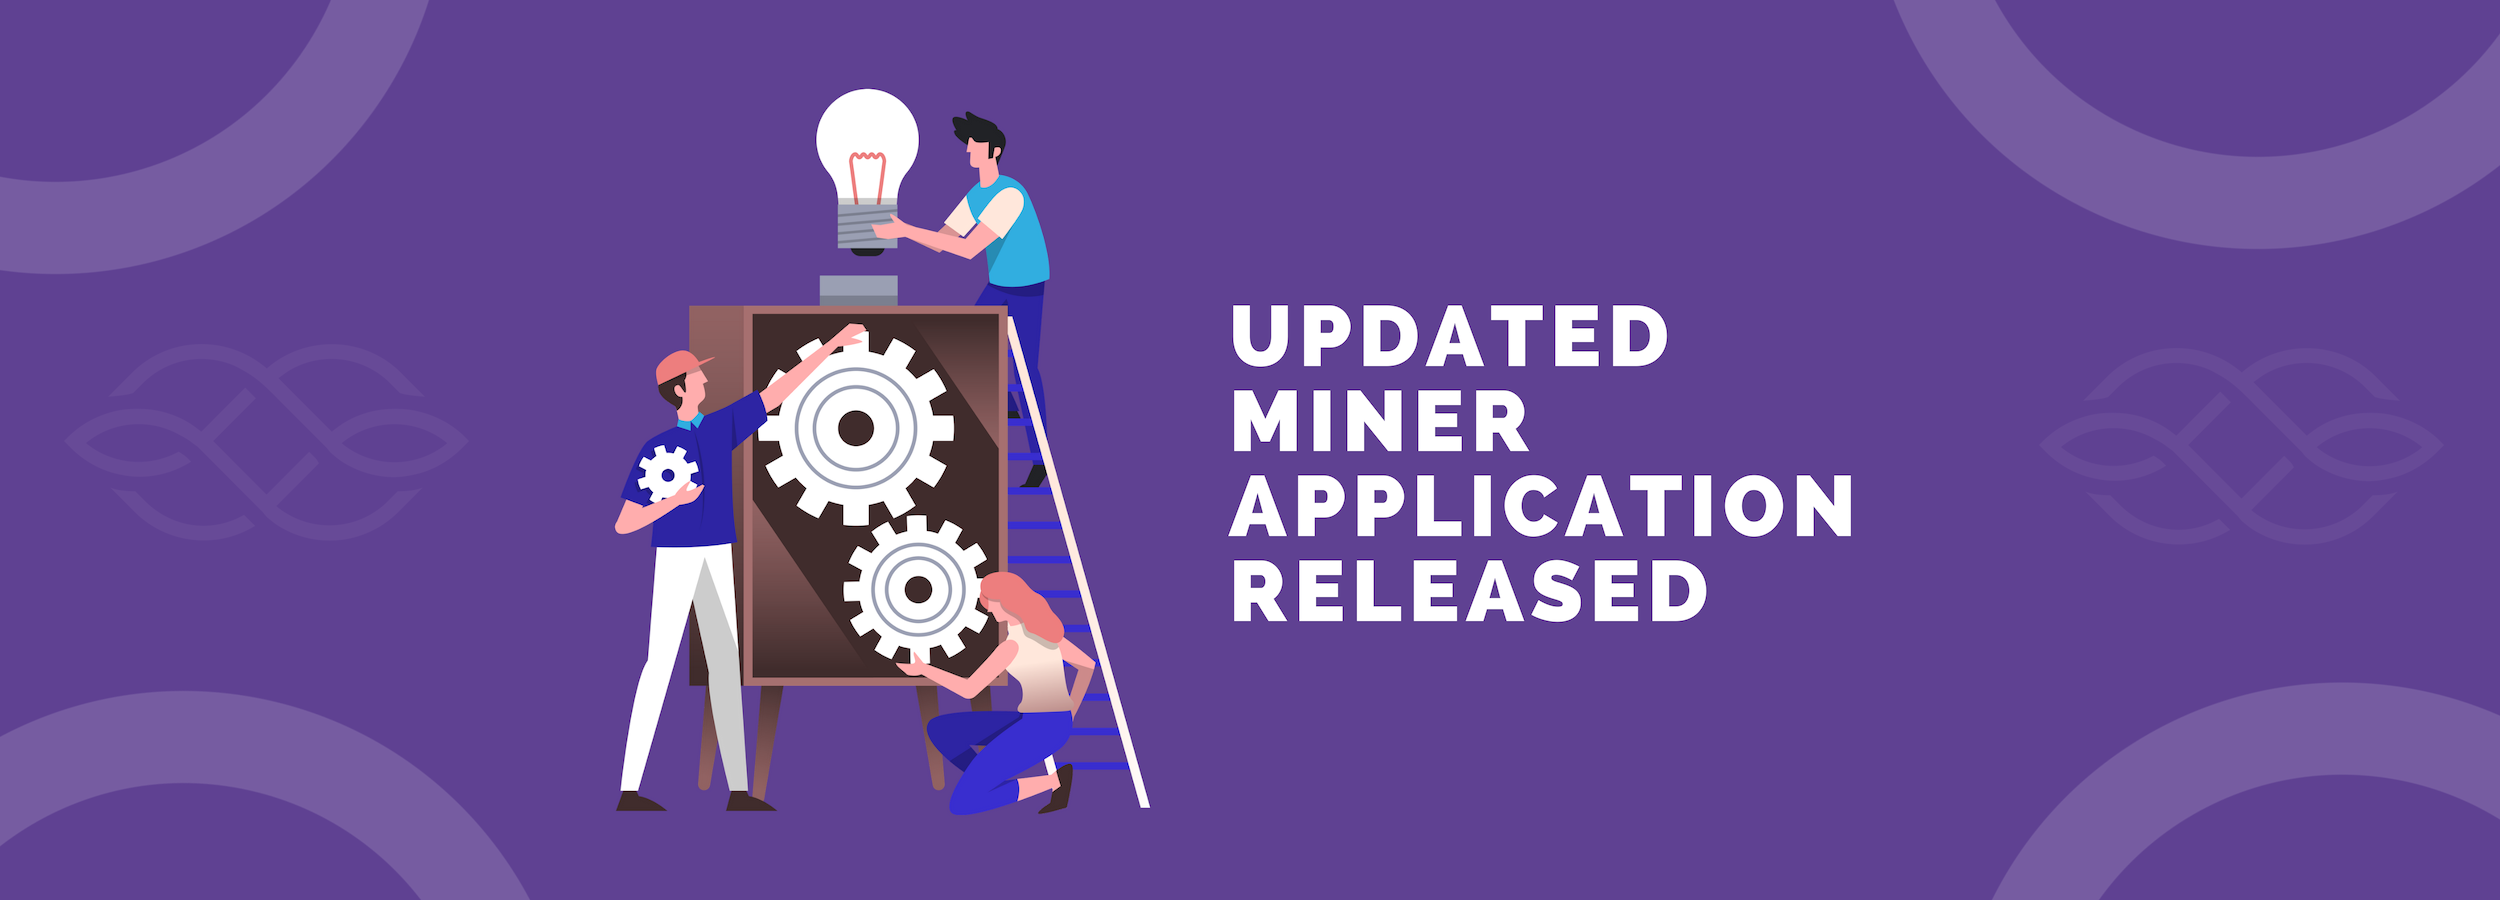 Great news: The Updated Miner App Is Released!